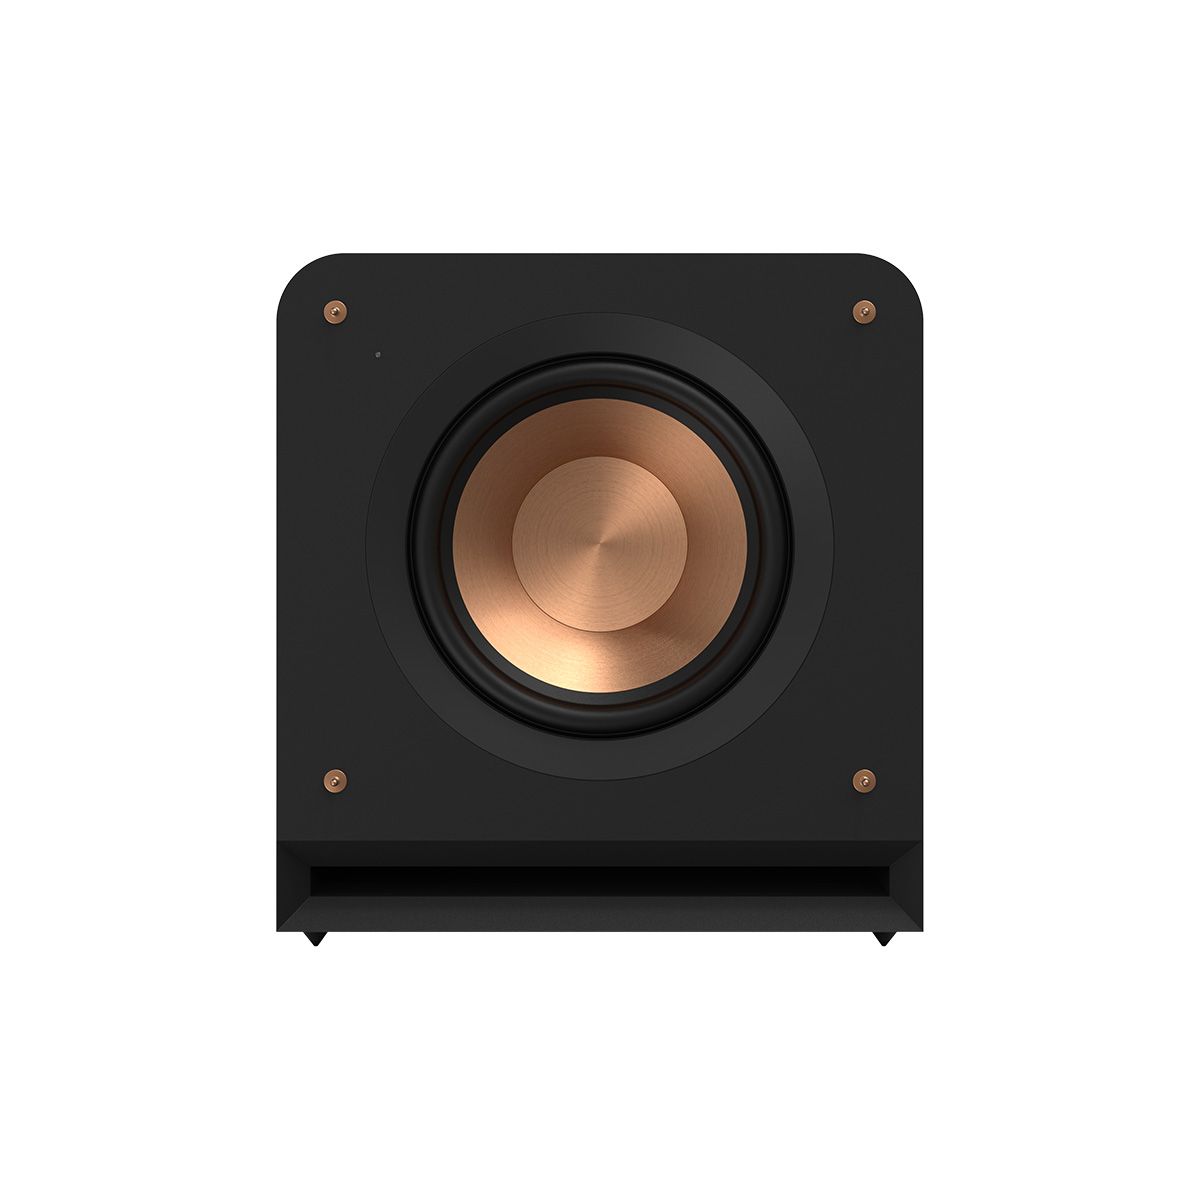 Klipsch RP-1000SW 10" Powered Subwoofer - Ebony - front view without grille